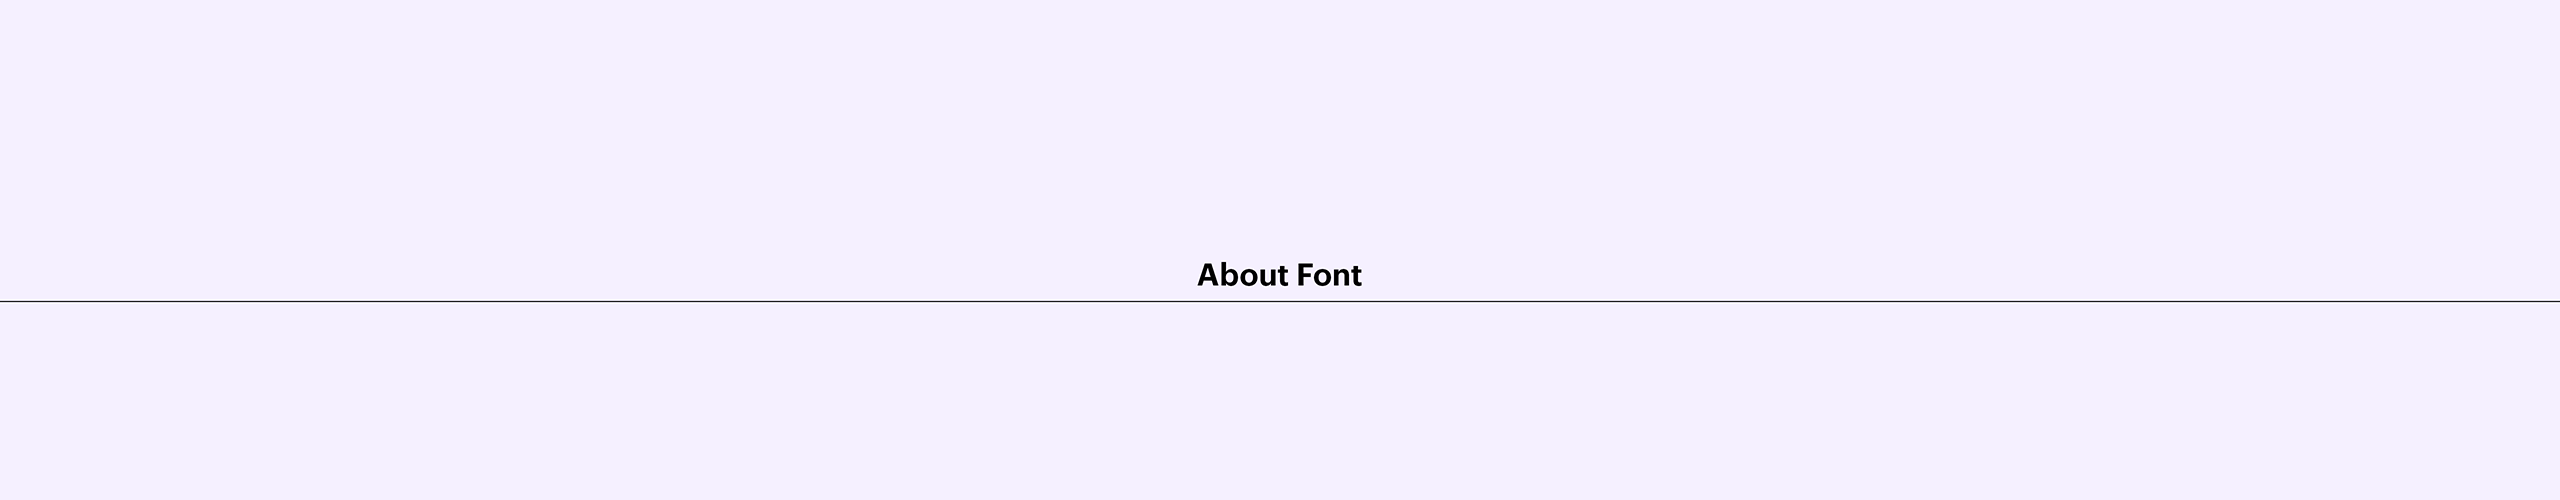 About font